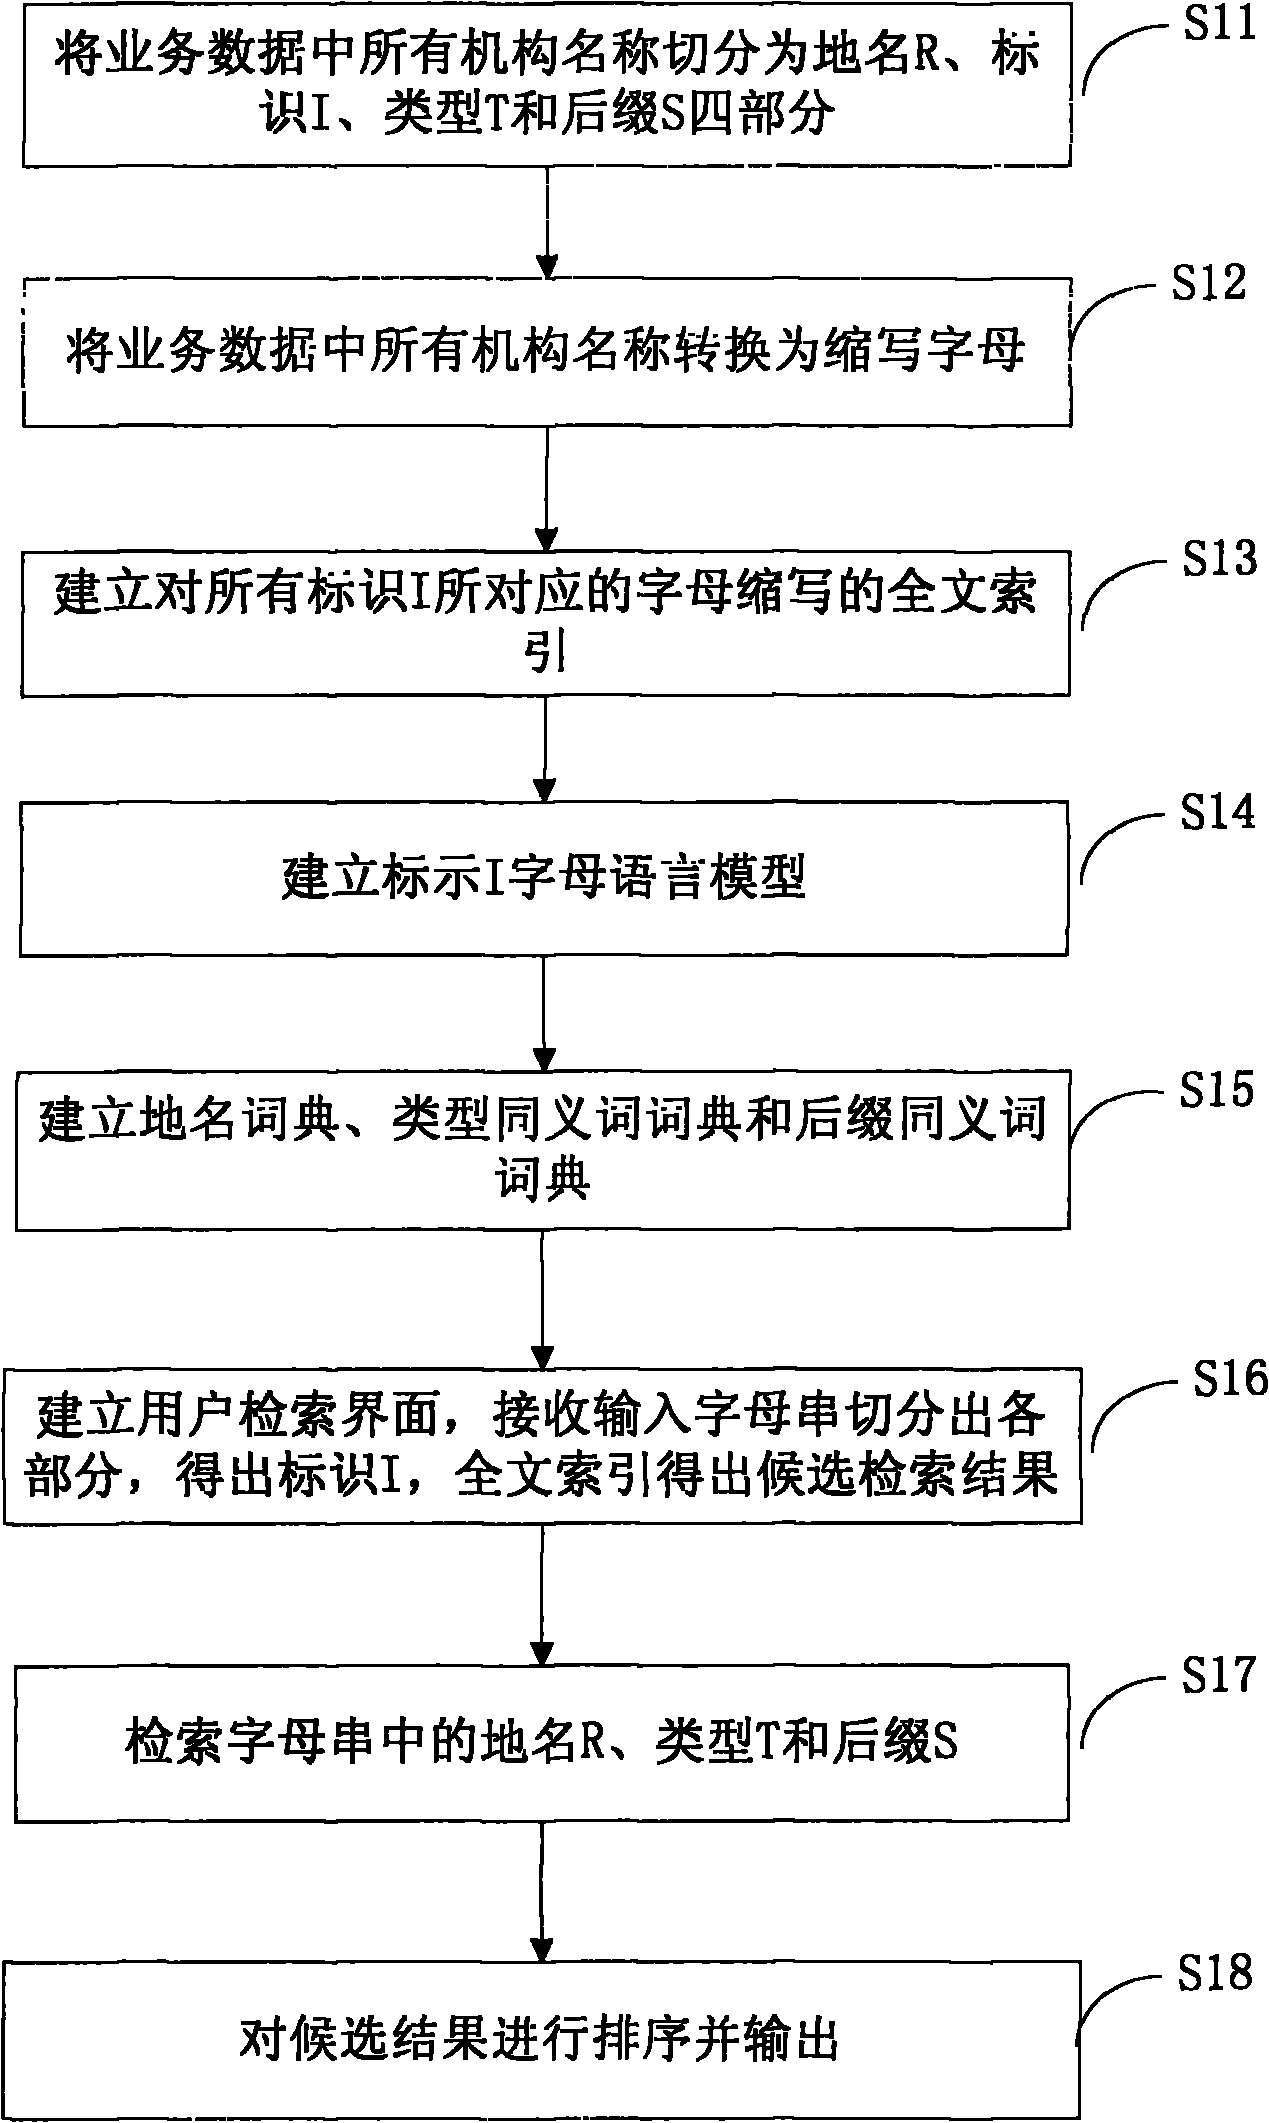 Method and system for retrieving organization names